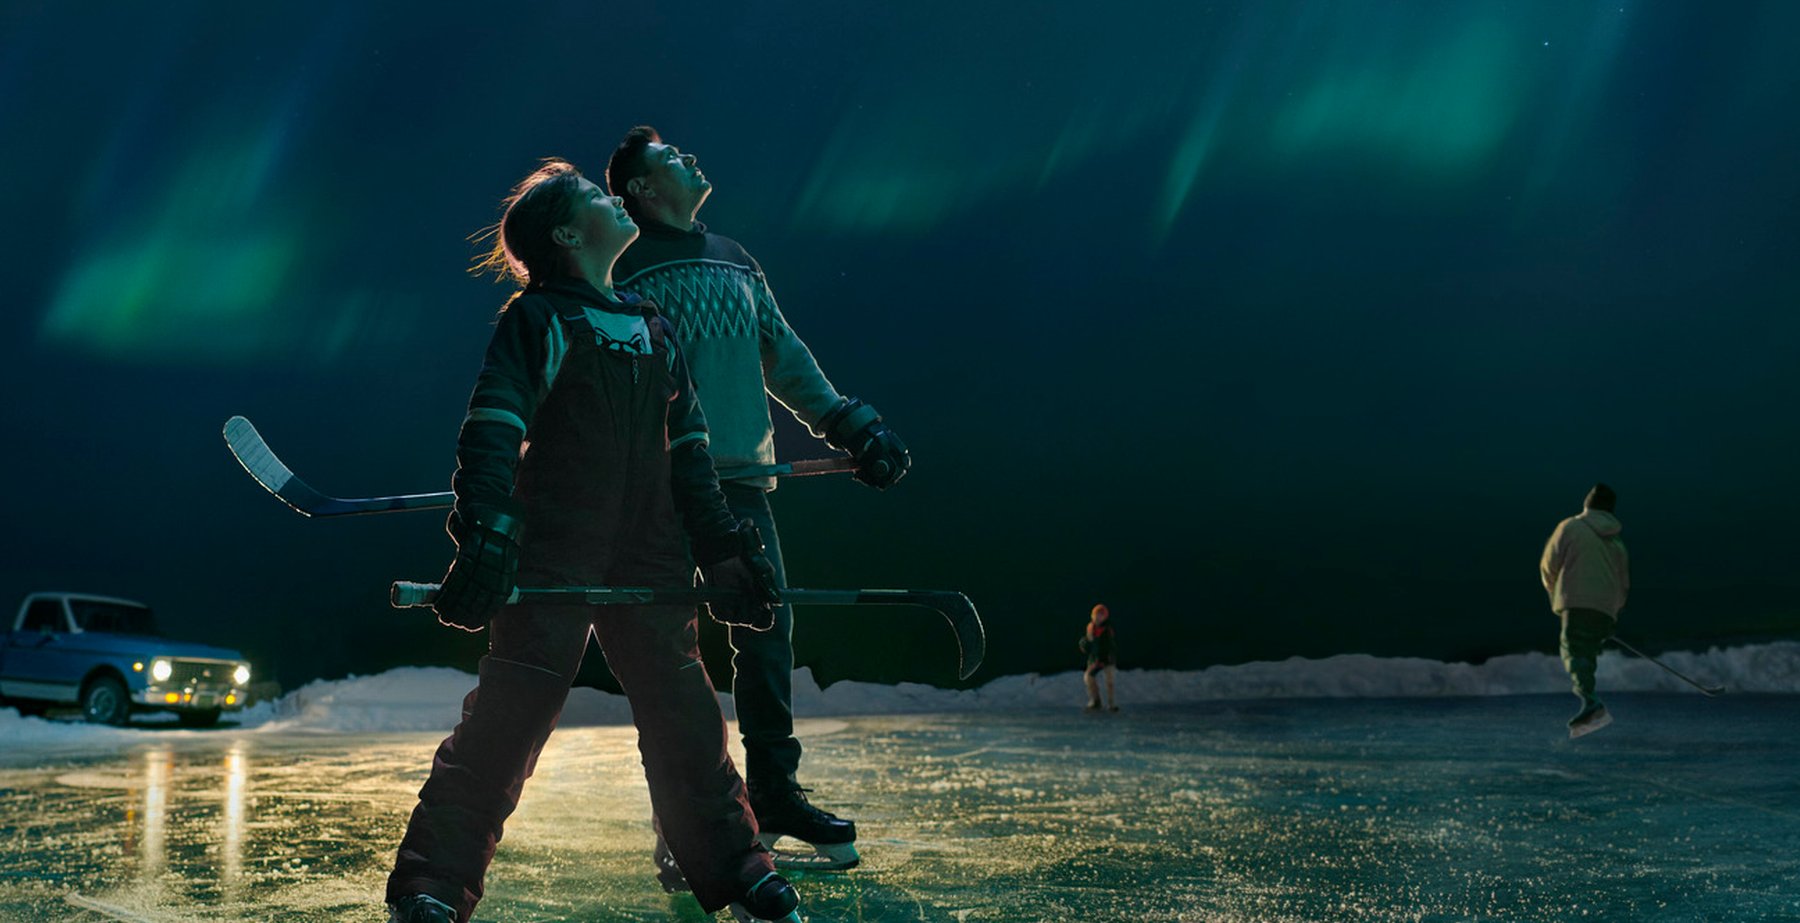 Hockey coach and player pausing from playing pond hockey to look up and admire the northern lights overhead.